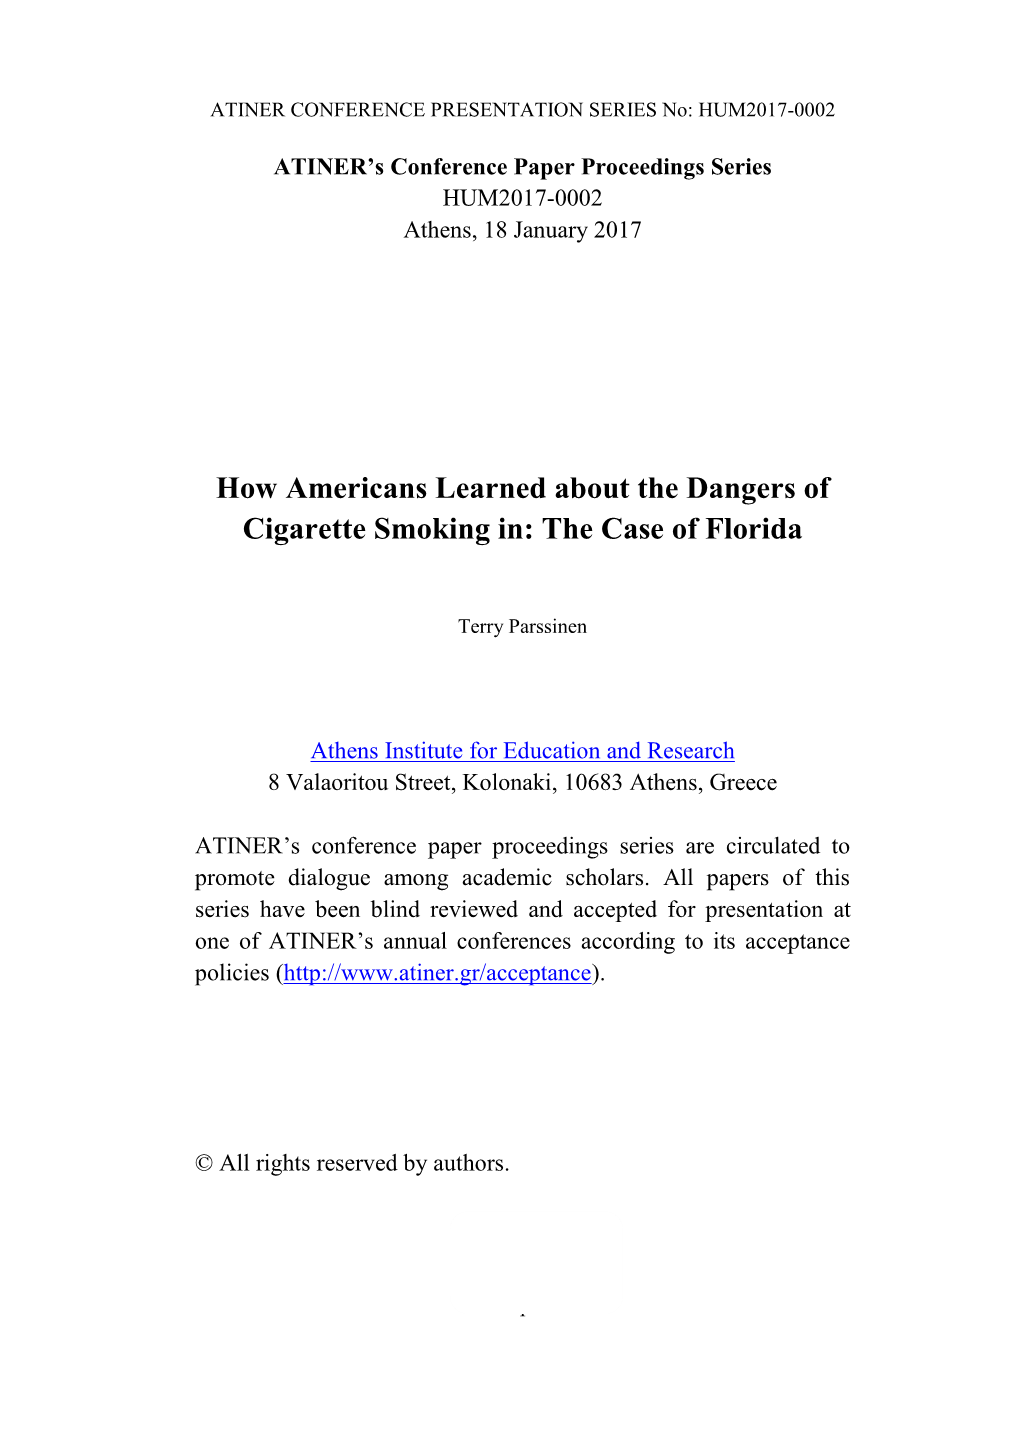 How Americans Learned About the Dangers of Cigarette Smoking In: the Case of Florida